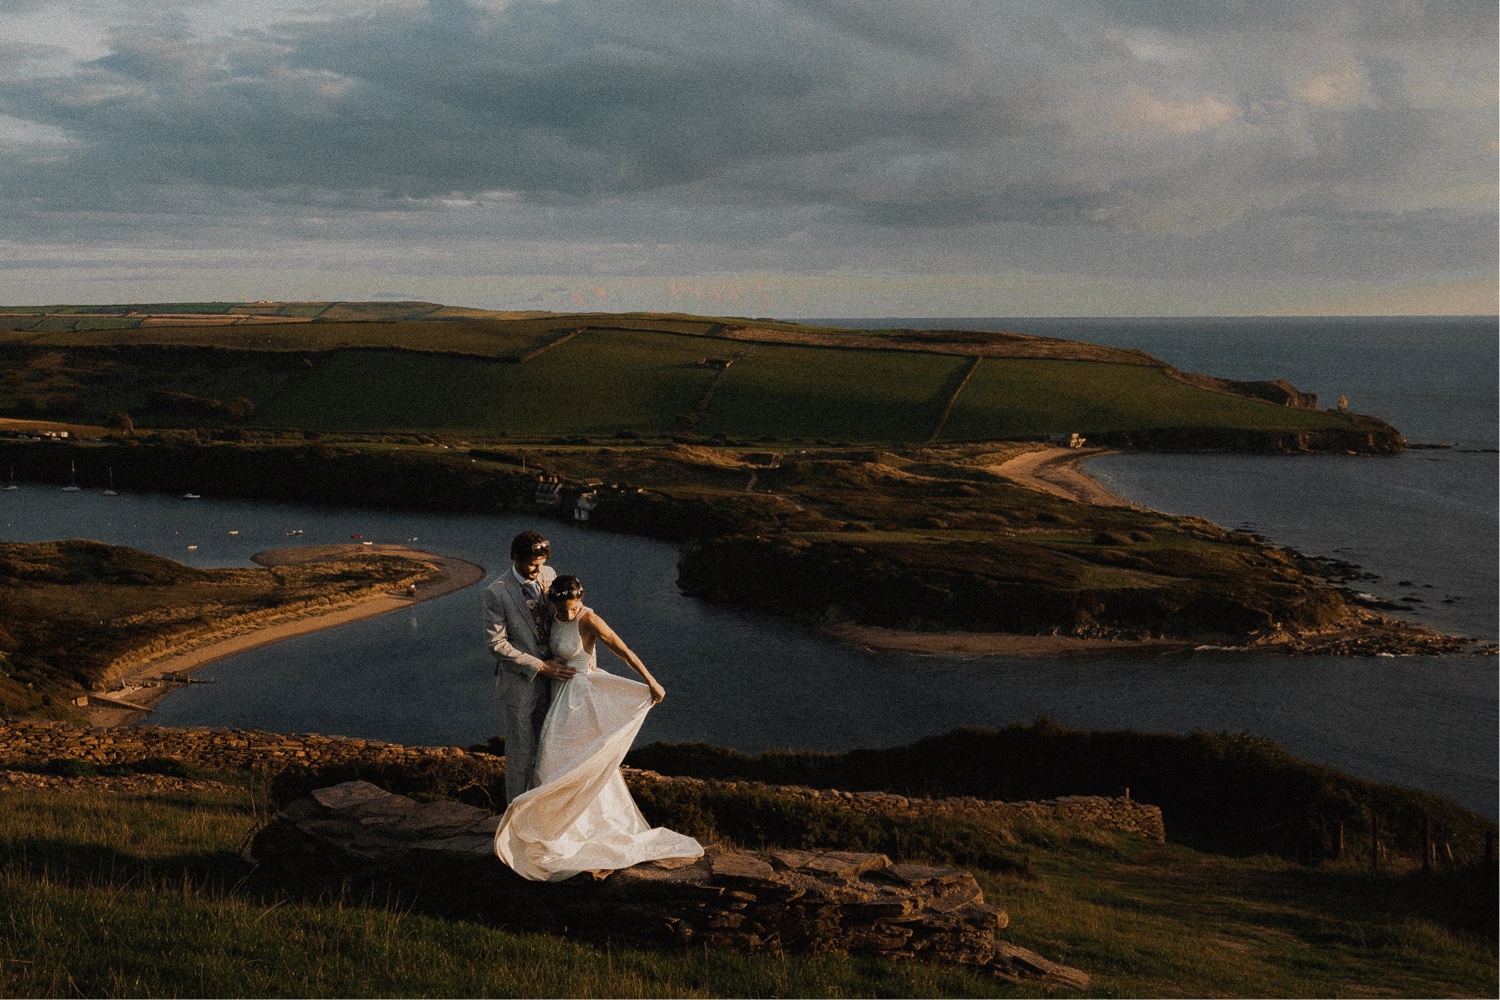 Wedding Photographs capturing a bride and groom atop a hill with an ocean view.